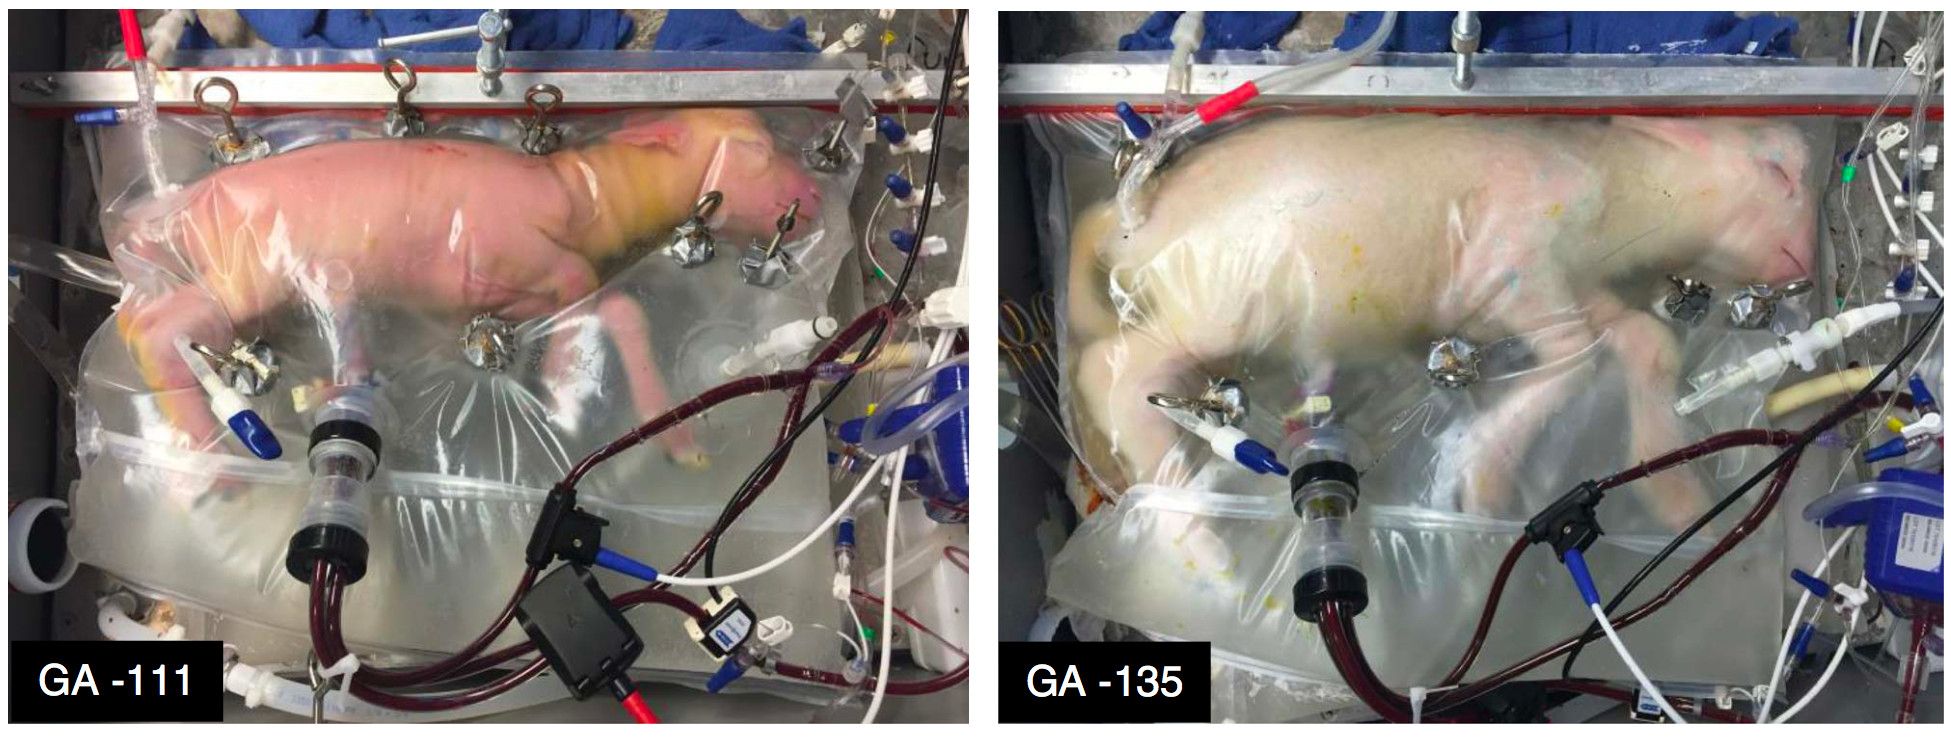 This Artificial Womb Could Revolutionise The Way We Treat Premature Babies 